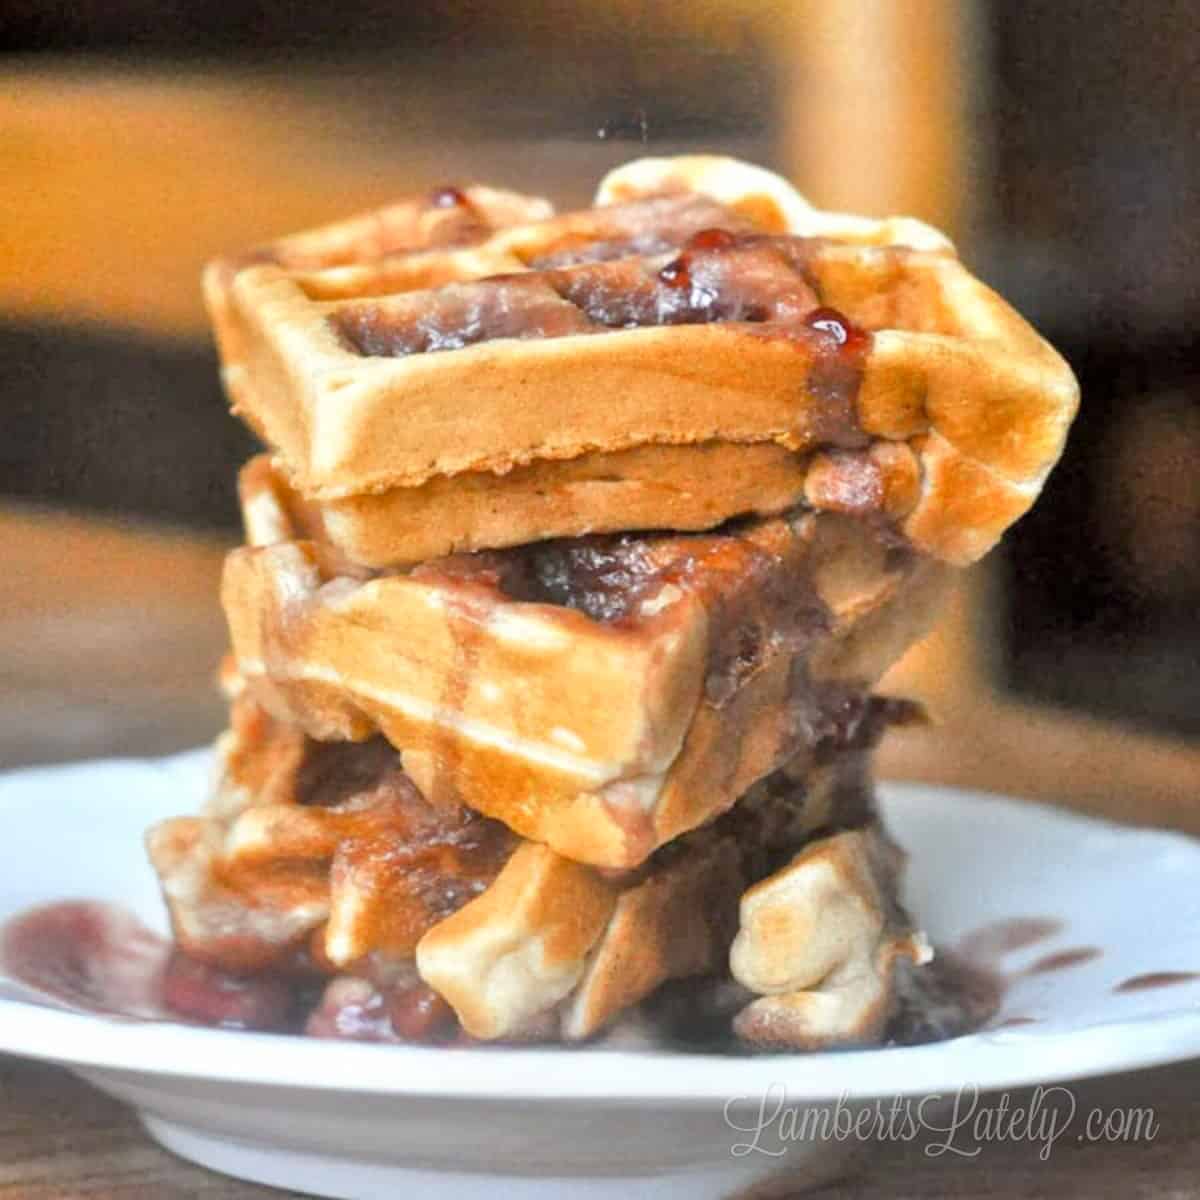 Peanut Butter Waffles with Jelly Syrup (+ Video)